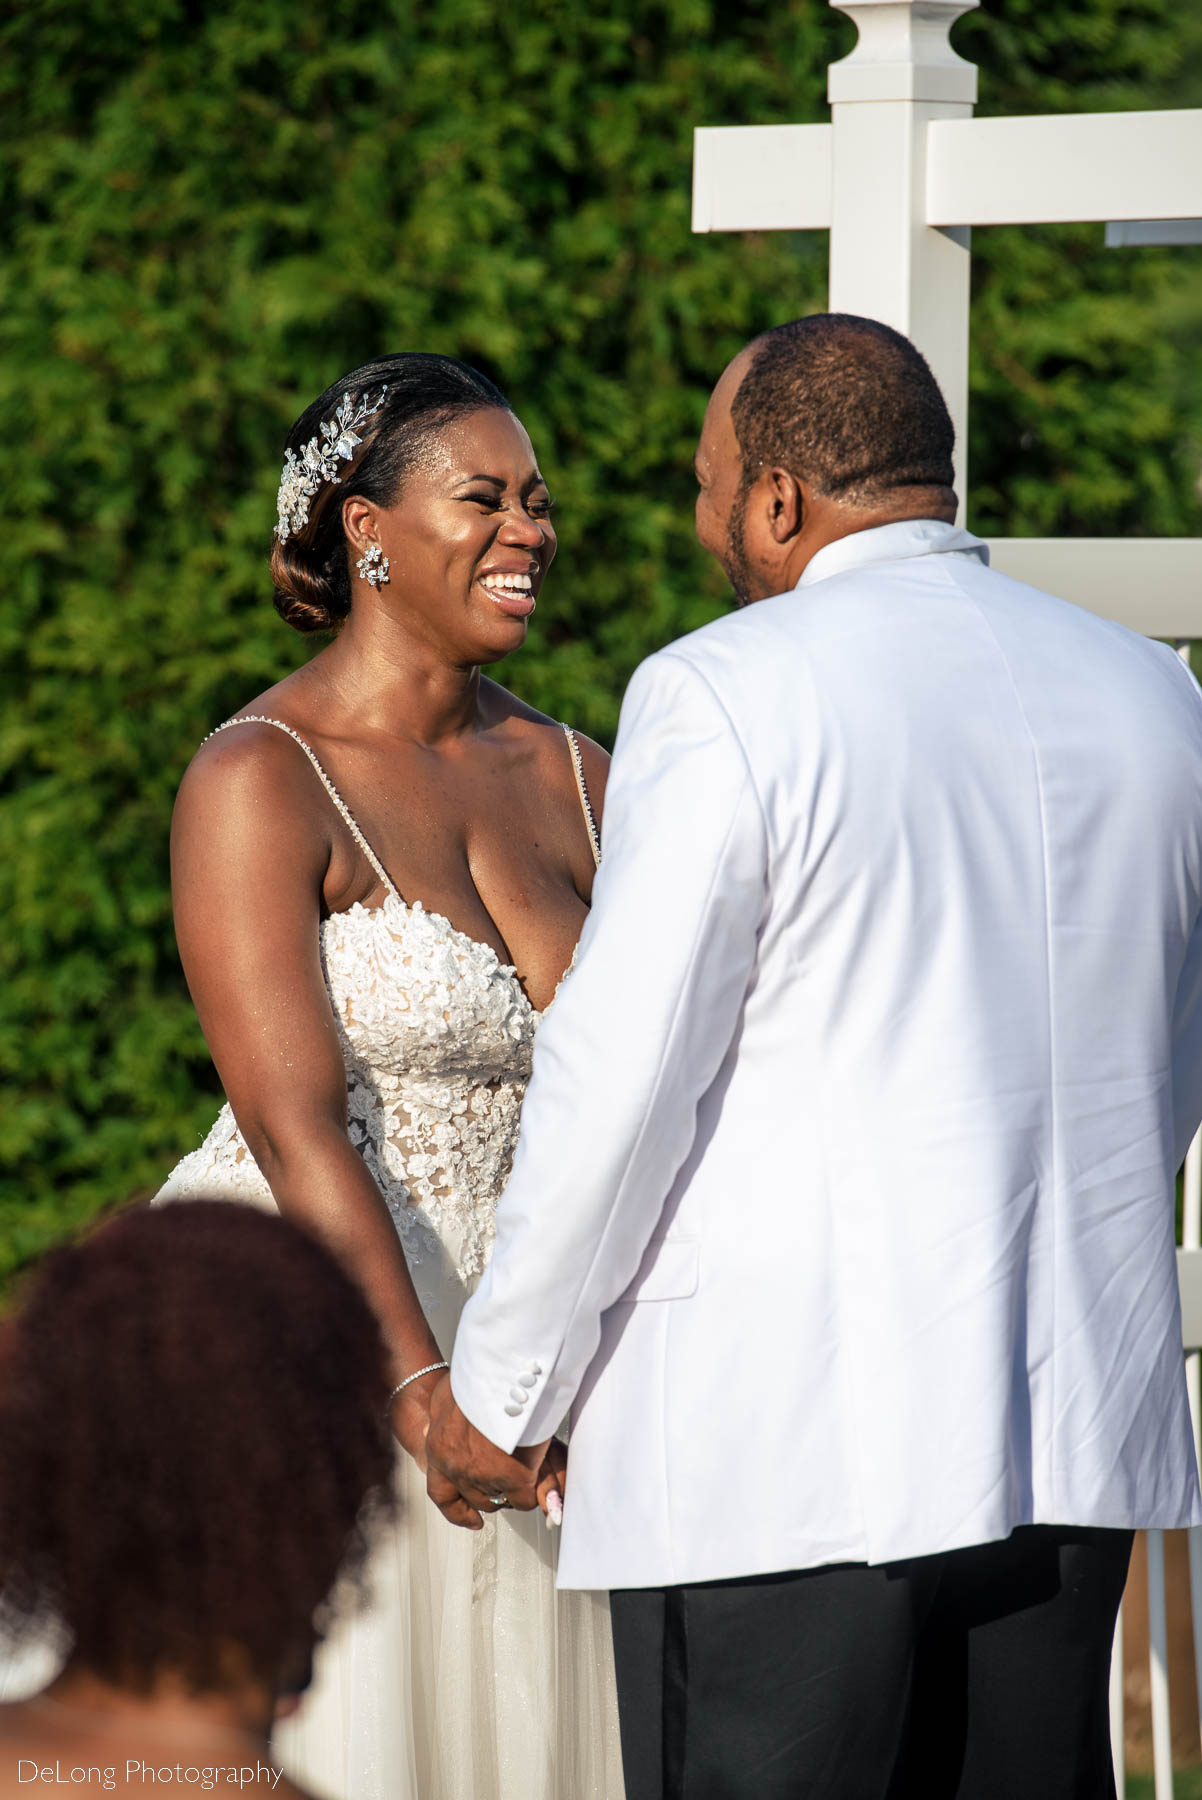 The bride giggling and smiling with her groom during their wedding ceremony at Providence Country Club by Charlotte wedding photographers DeLong Photography